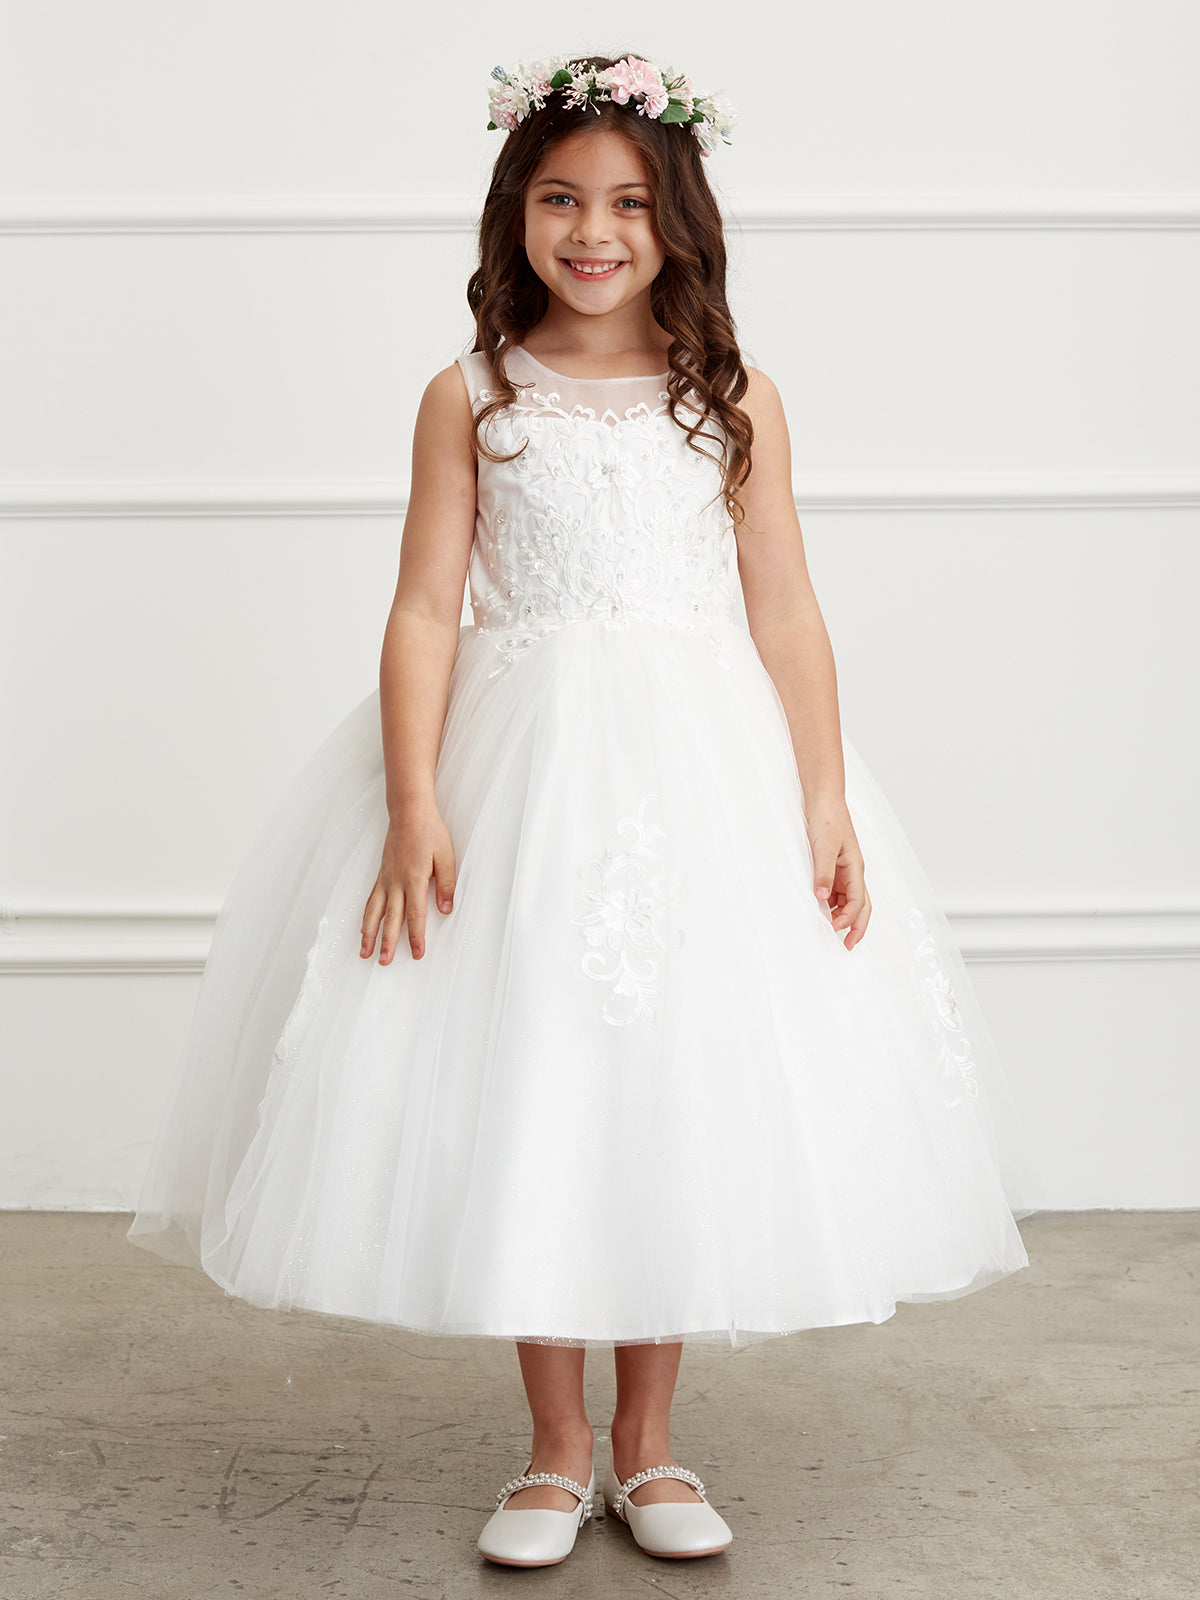 Baby Girls Frock Dress Girls Floral Sleeveless Formal Dress Princess  Bridesmaid Party Dresses Birthday Pageant Evening Prom Ball Gown for Kids  4-12 Years : Amazon.in: कपड़े और एक्सेसरीज़